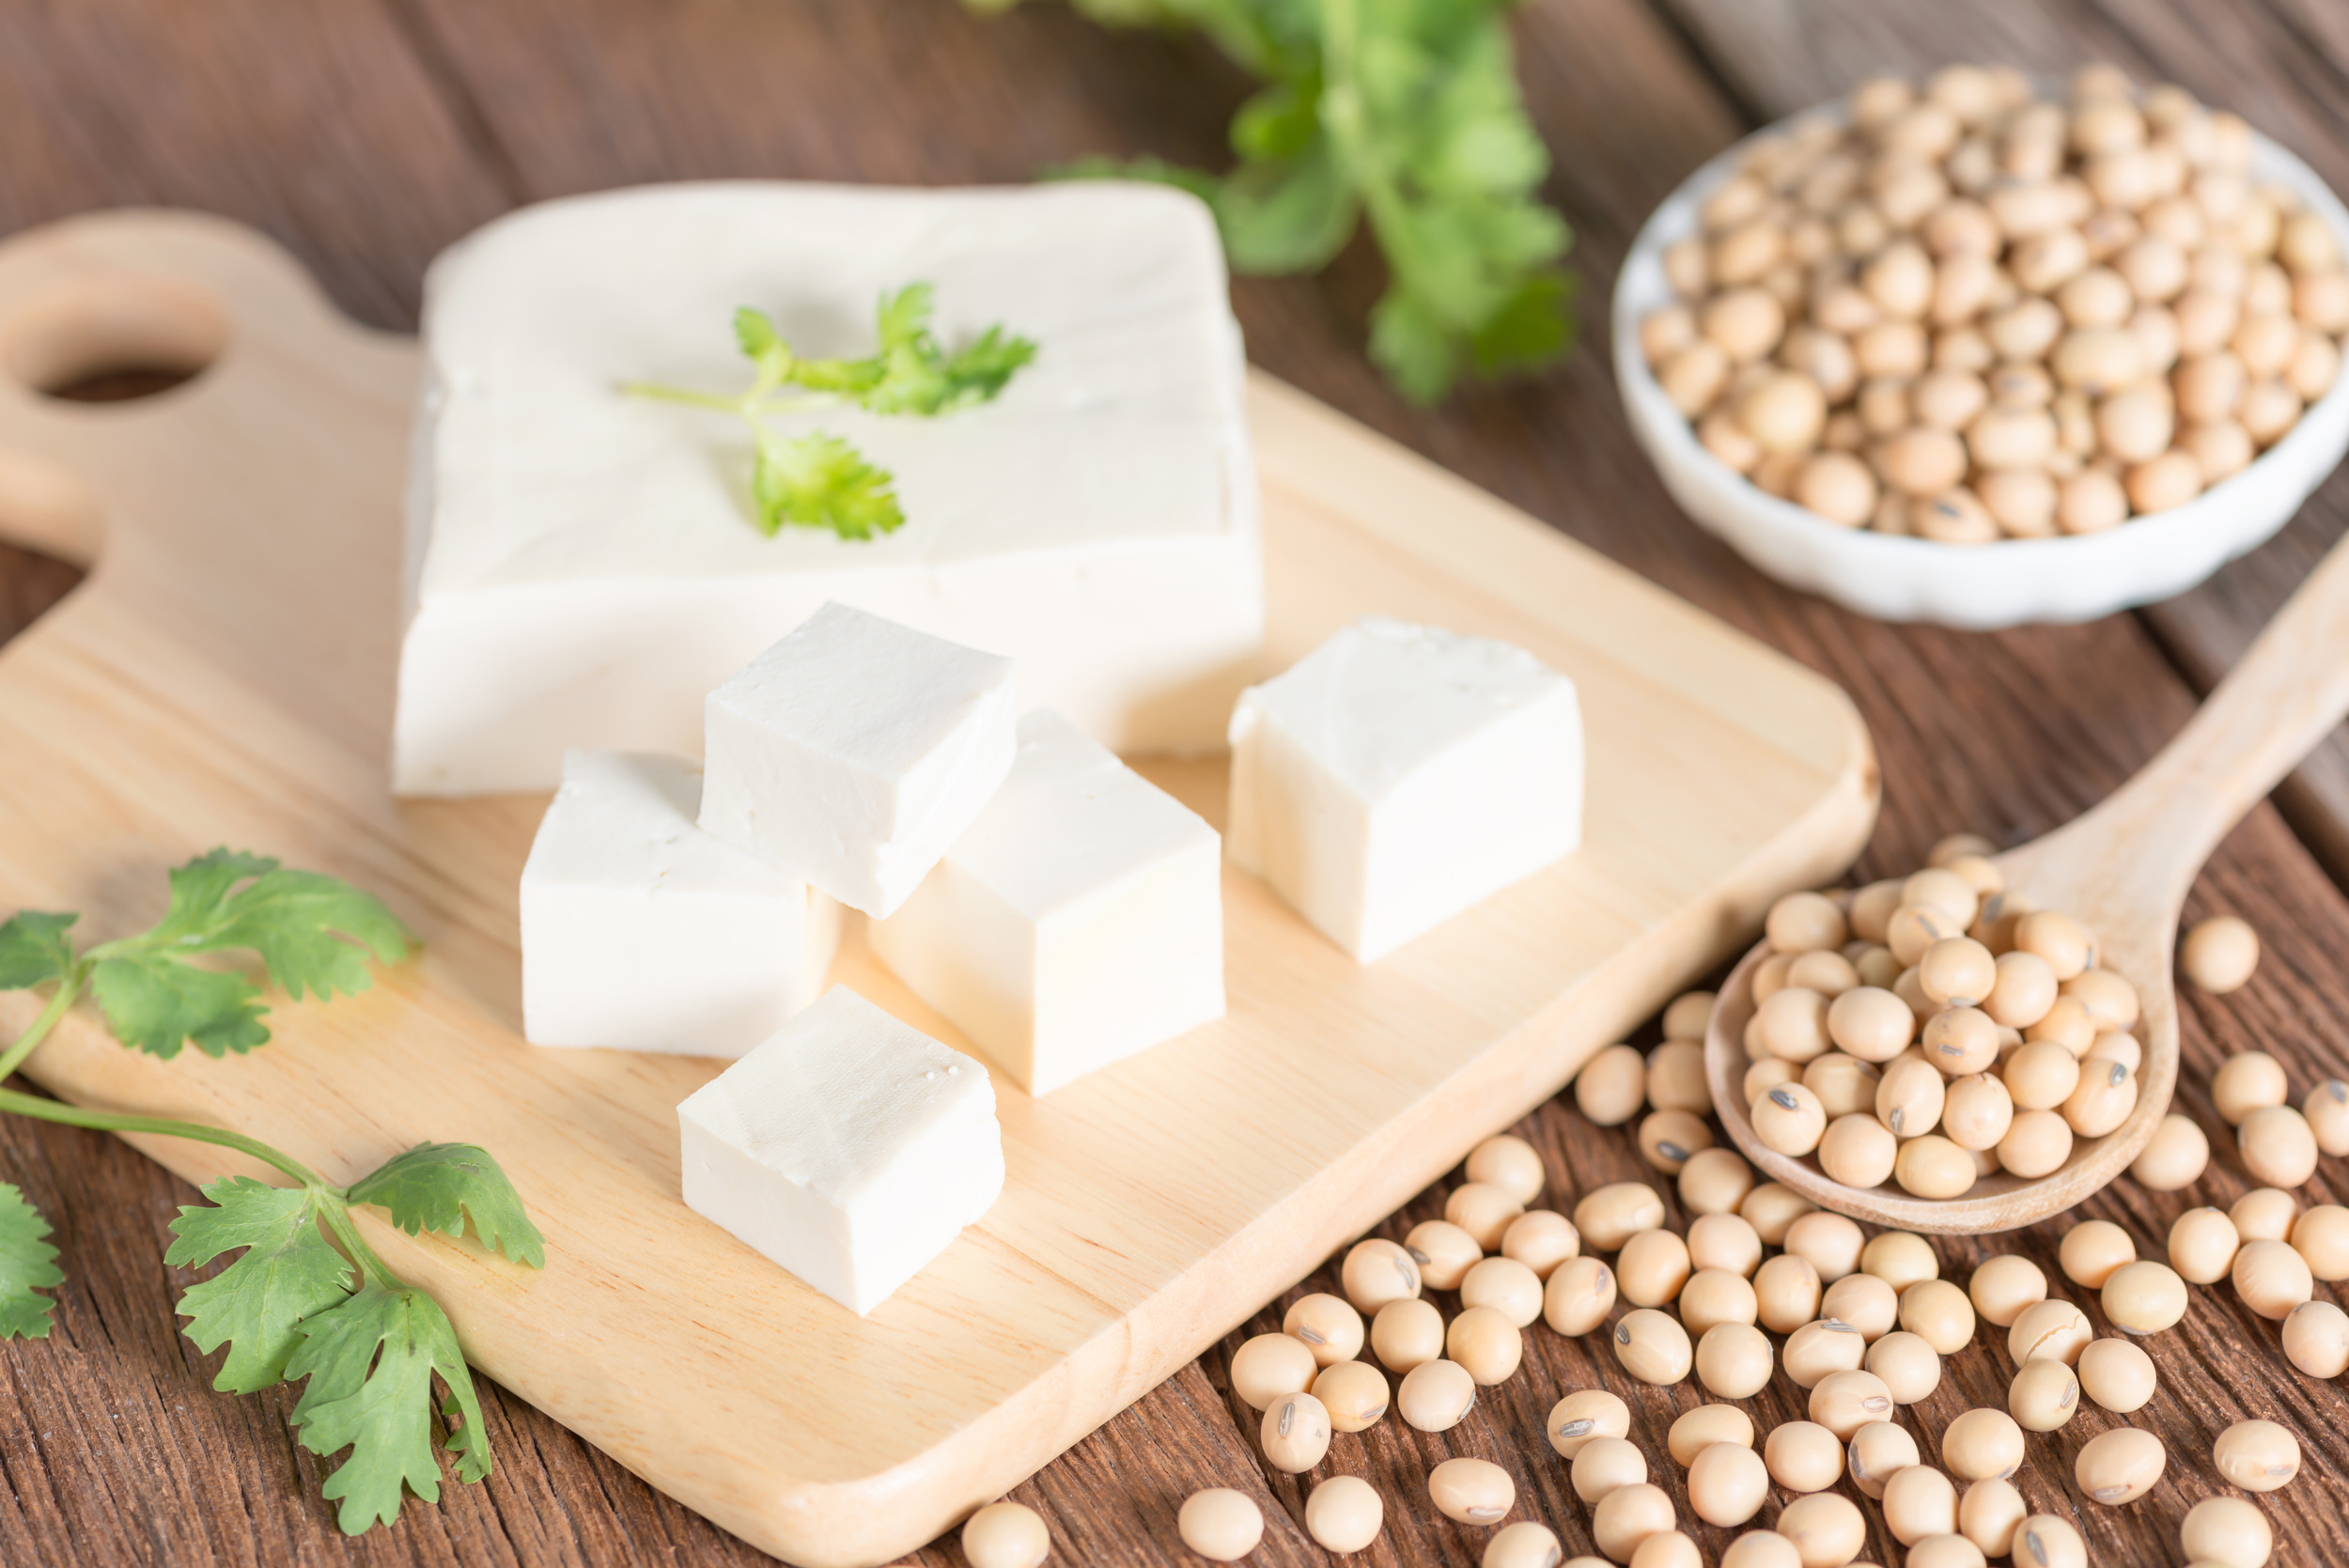 <p>The word “tofu” might be Japanese, but it originally comes from the Chinese term “doufu,” which means rotten beans since tofu is essentially fermented soybeans.</p><p>You may also like: <a href='https://www.yardbarker.com/lifestyle/articles/when_in_rome_15_things_you_must_do_in_the_capital_of_italy_031424/s1__37929306'>When in Rome: 15 things you must do in the capital of Italy</a></p>